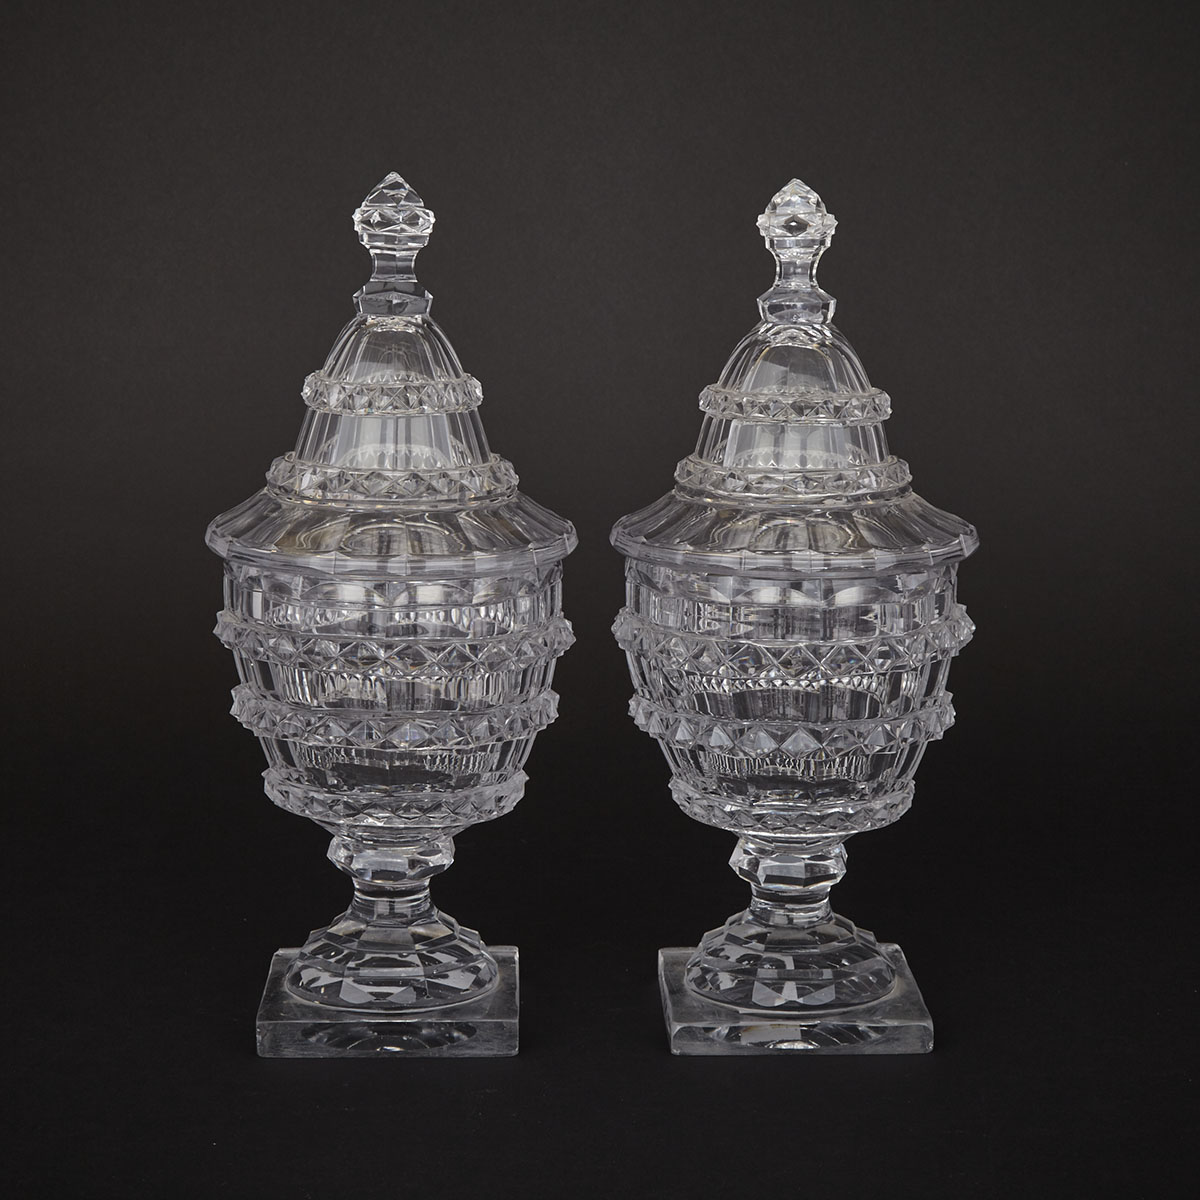 Pair of Anglo-Irish Cut Glass Covered Urns, c.1790